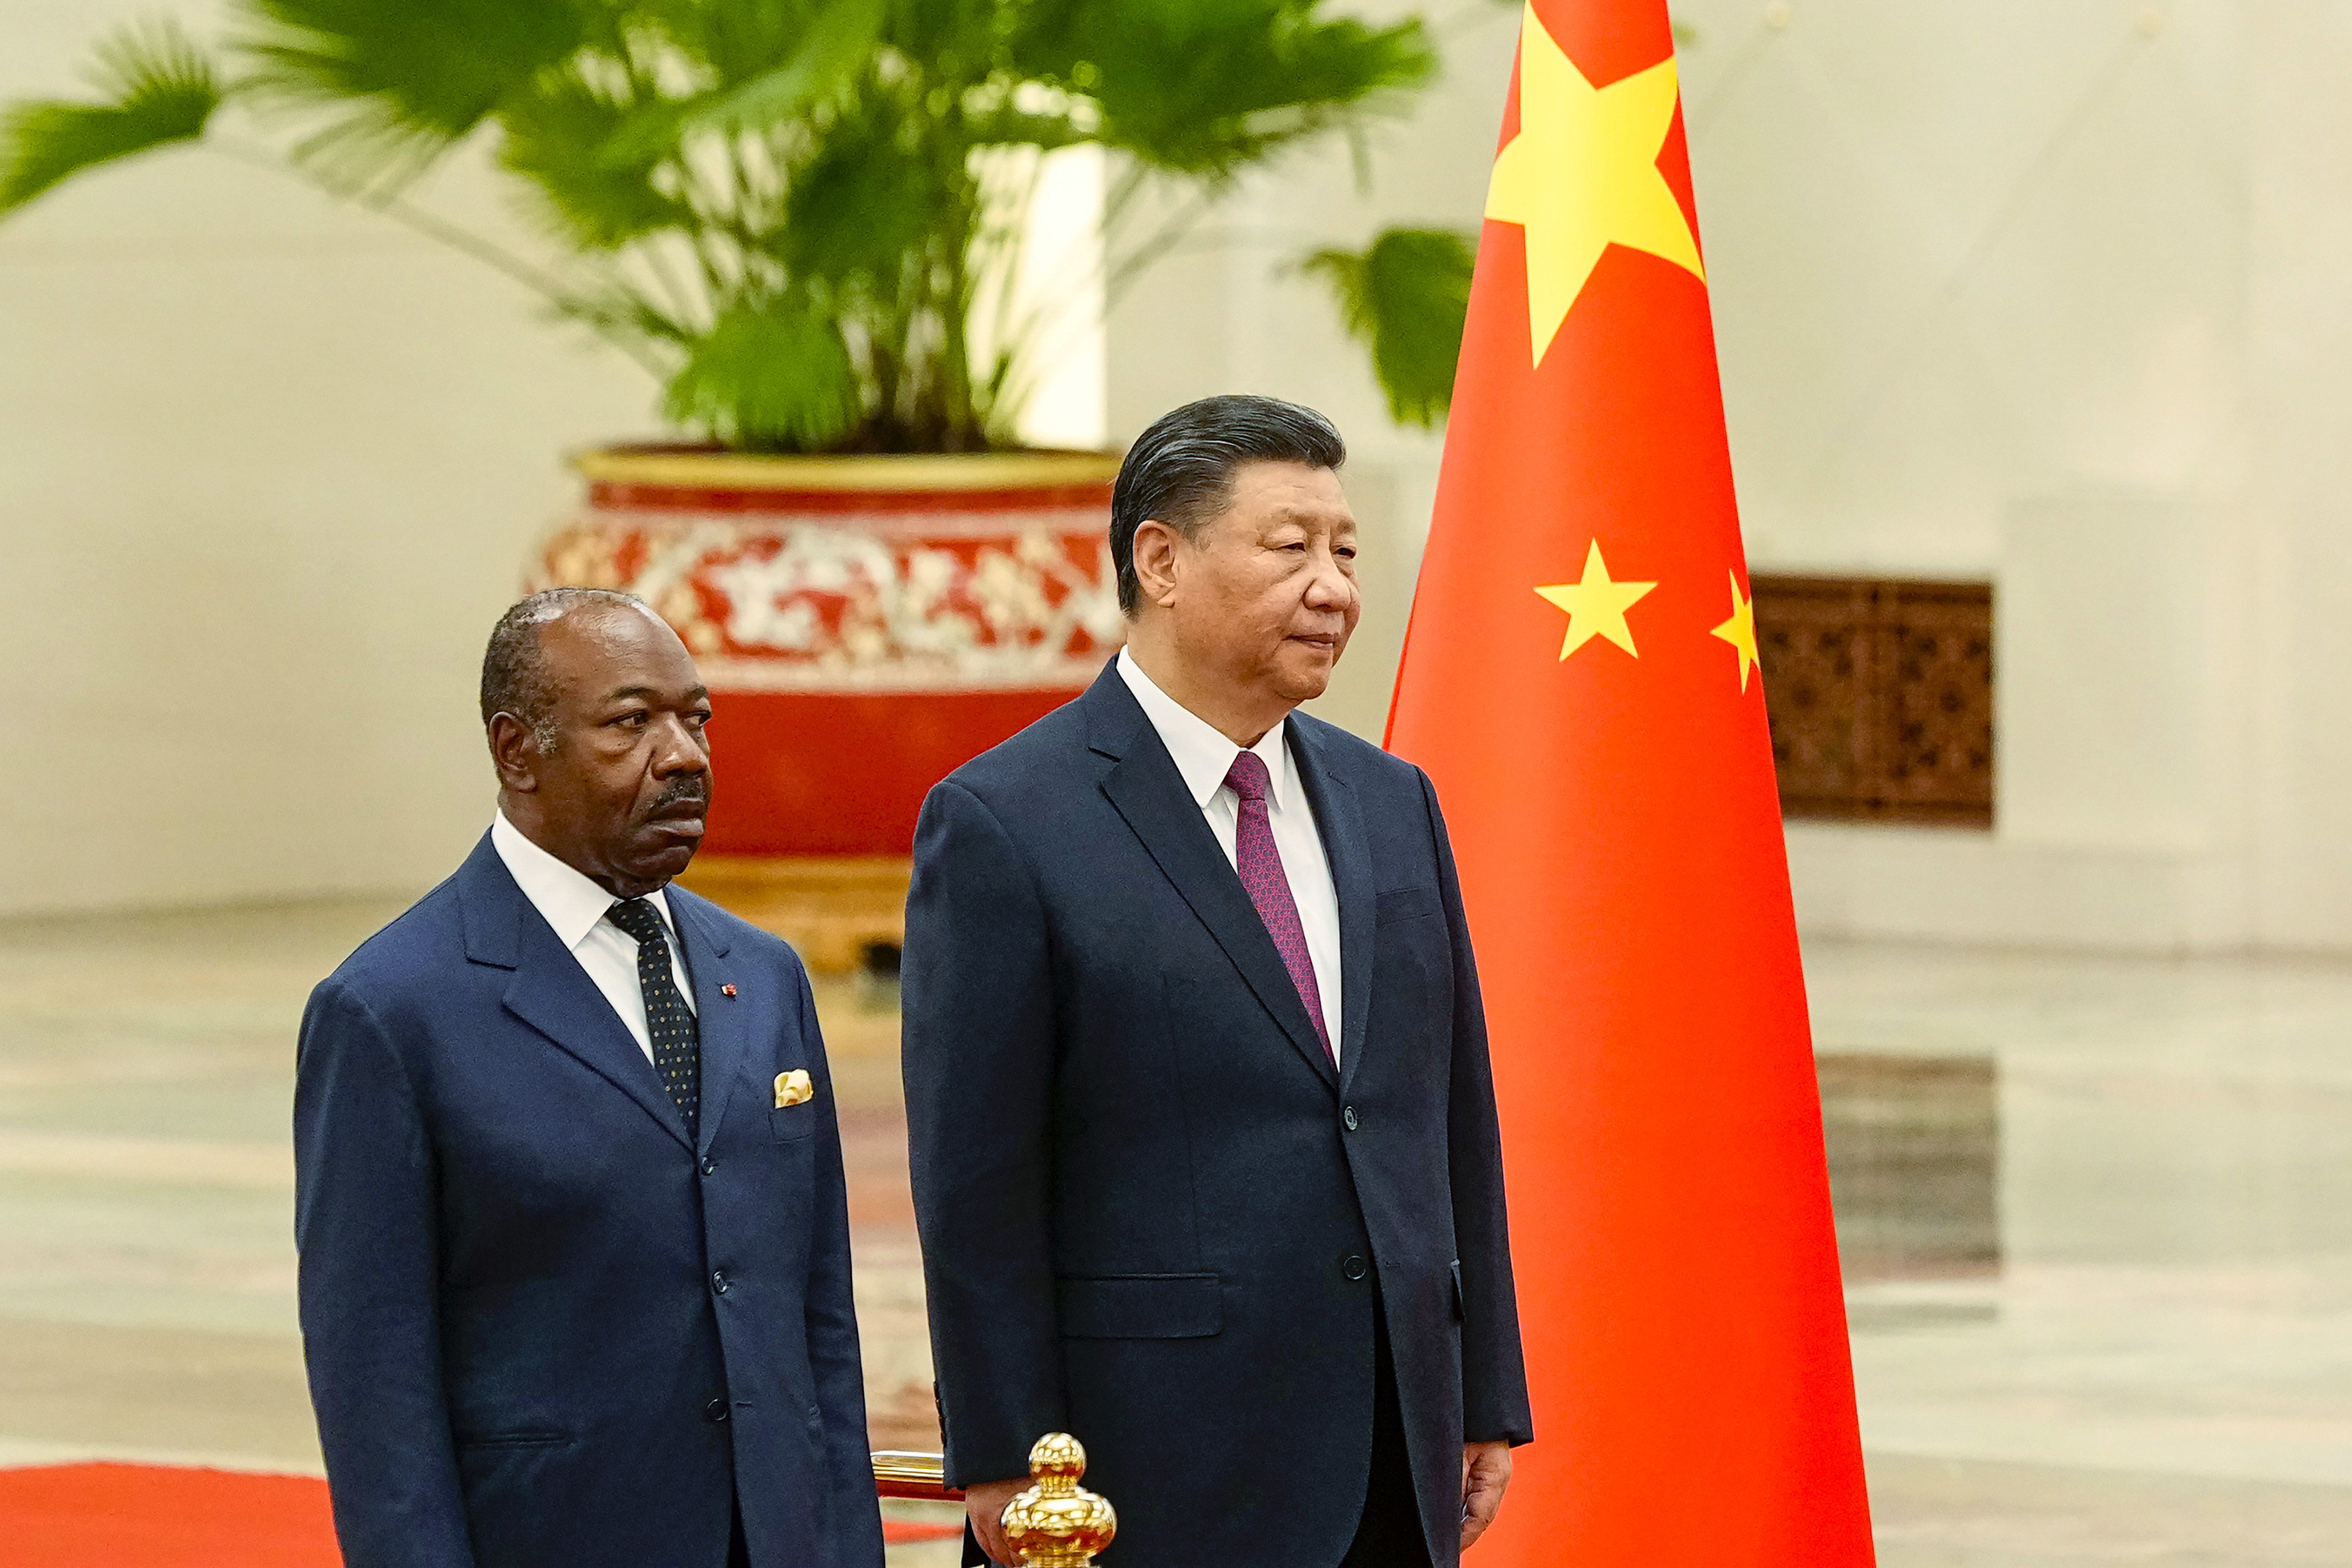 Gabonese President Ali Bongo Ondimba and Chinese leader Xi Jinping inspect an honour guard during a welcome ceremony at the Great Hall of the People in Beijing on Wednesday. Photo: AP